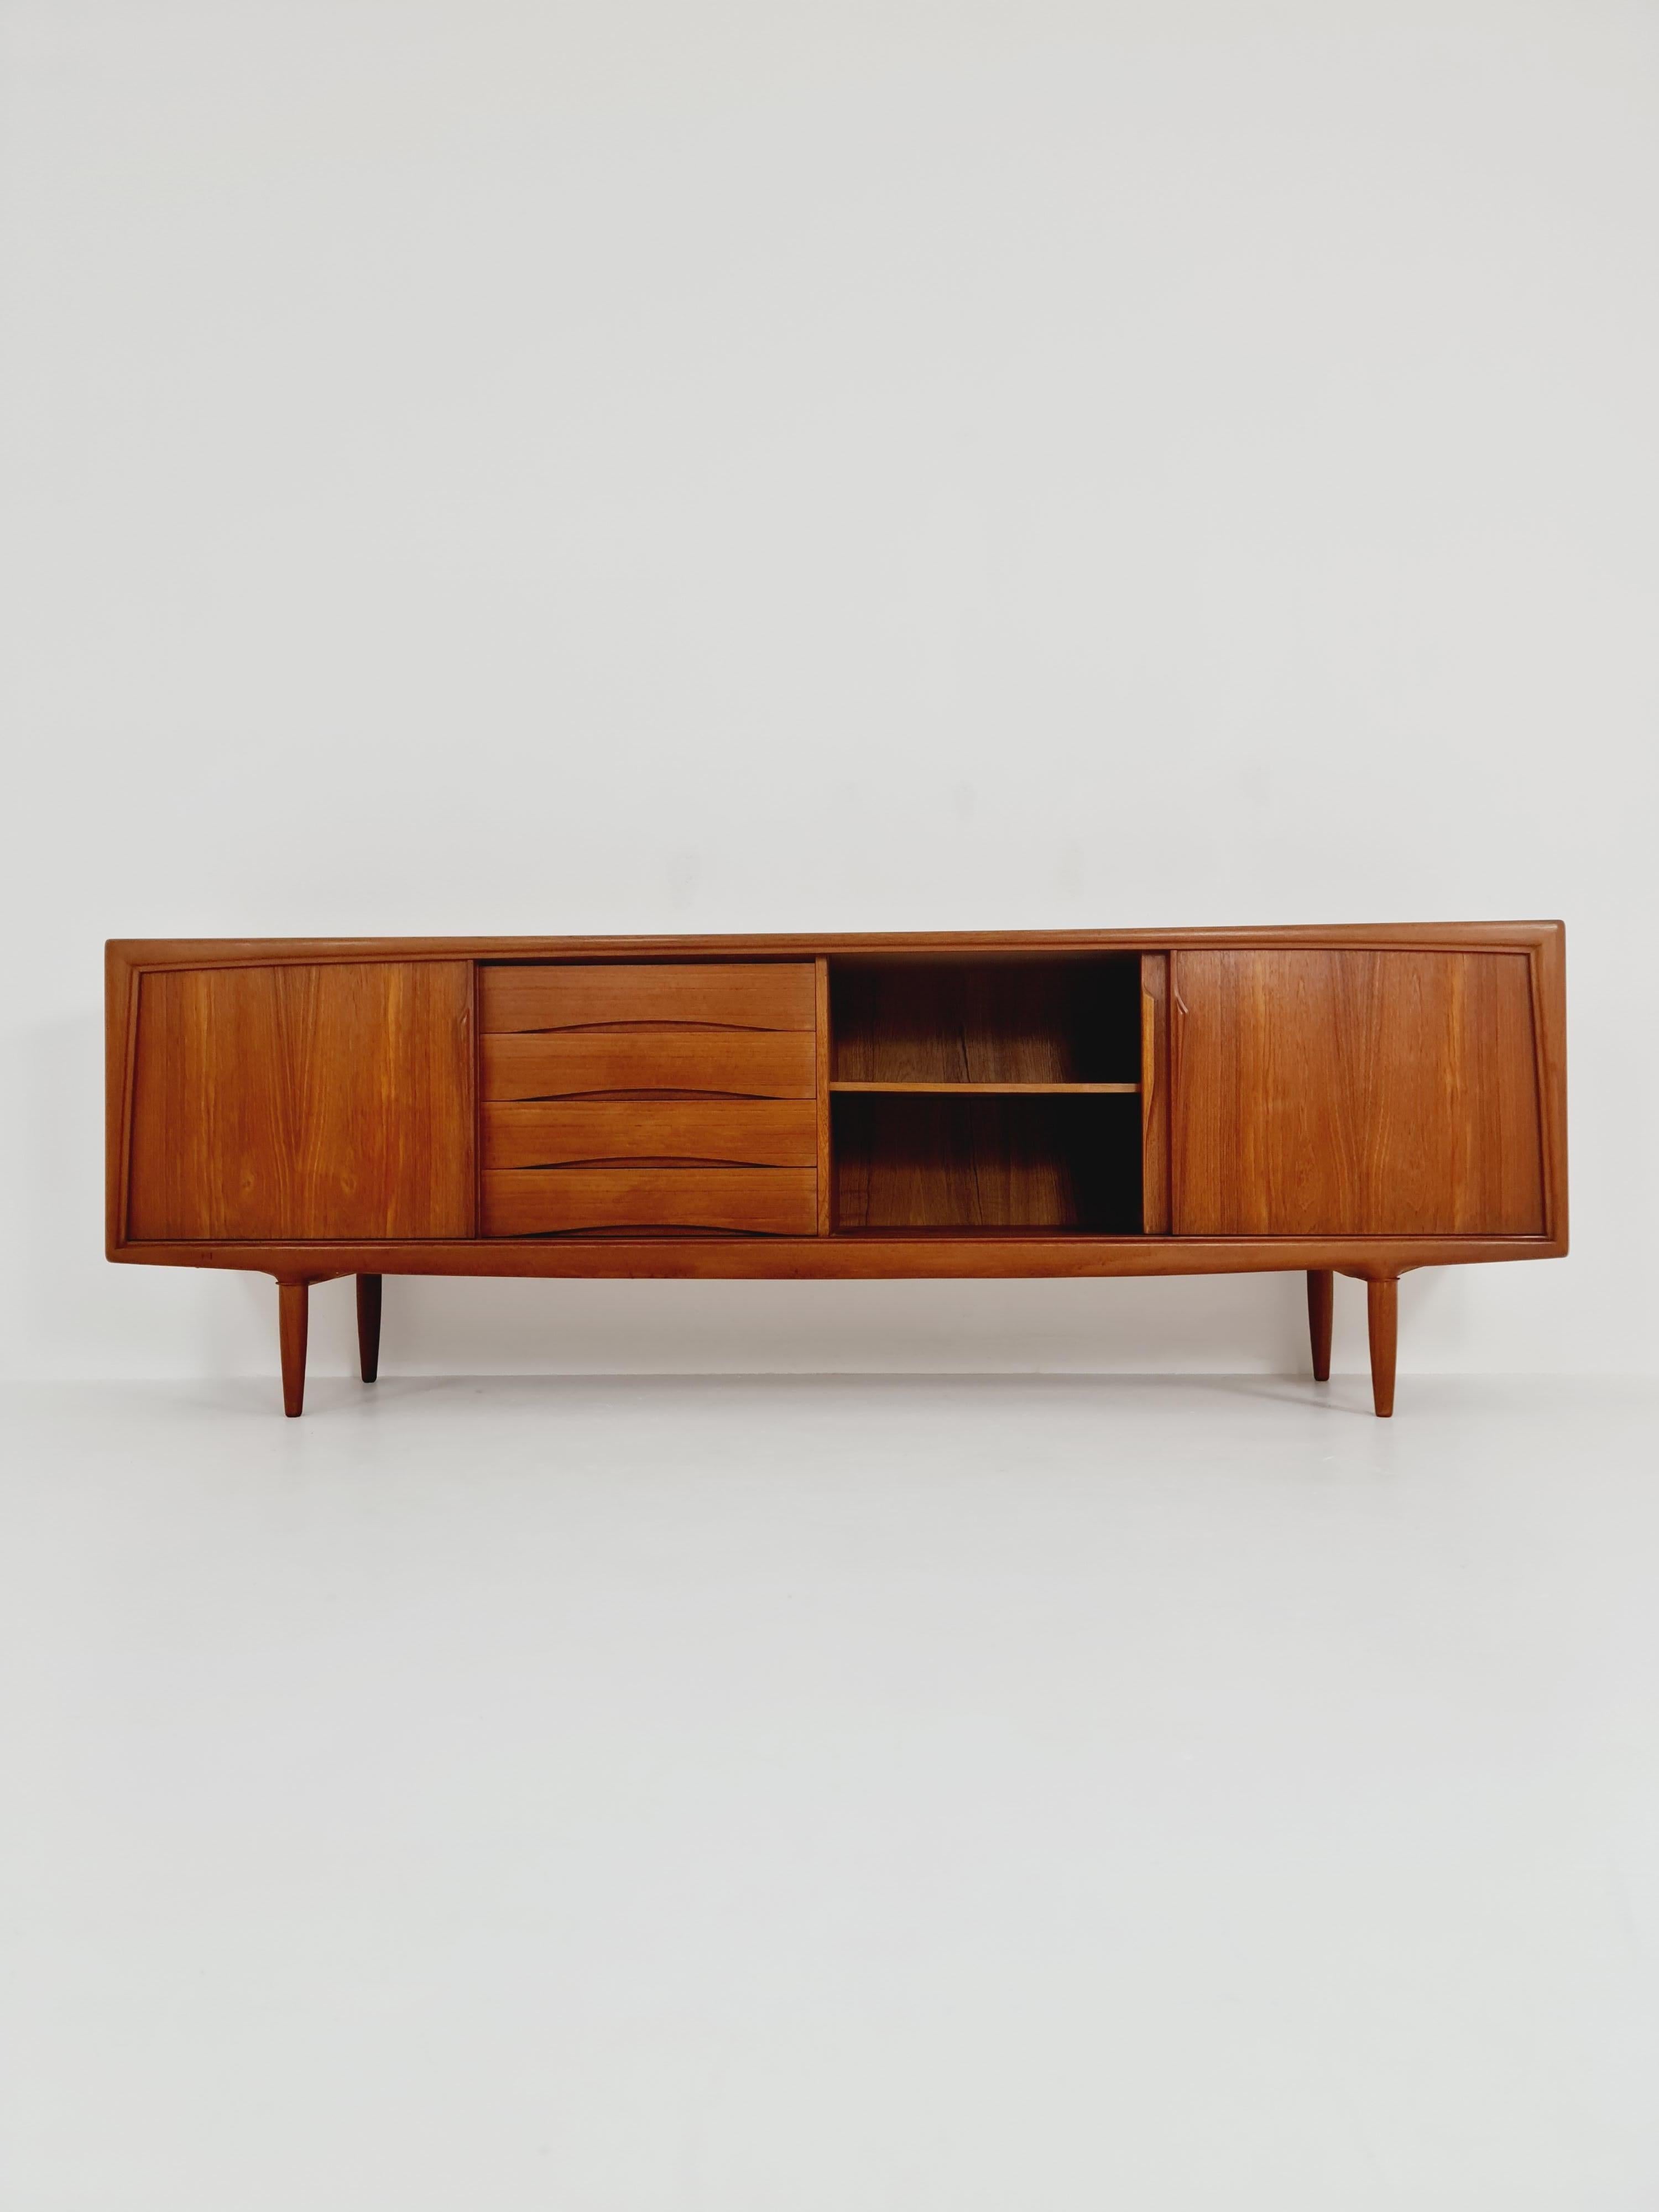 Vintage Mid century Danish Sideboard by Axel Christensen for ACO Møbler, Denmark, 1960s

Dimensions: 
46 D x 250 W x 80 H cm

It is in good vintage condition, however, as with all vintage items some minor wear marks should be expected.

Please